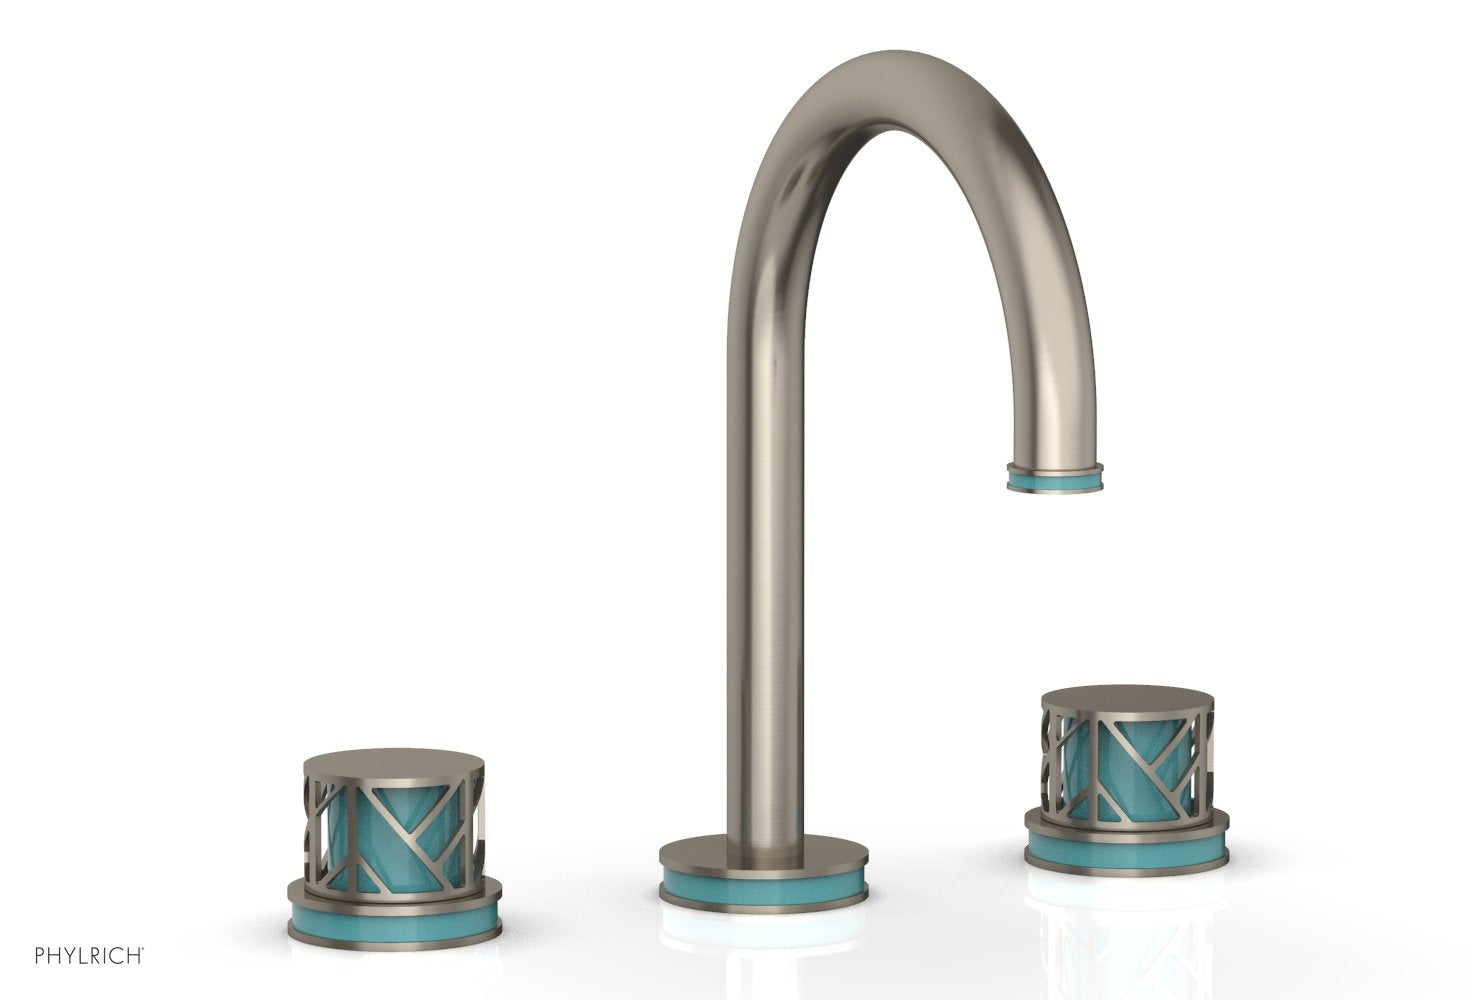 Phylrich JOLIE Widespread Faucet - Round Handles with "Turquoise" Accents